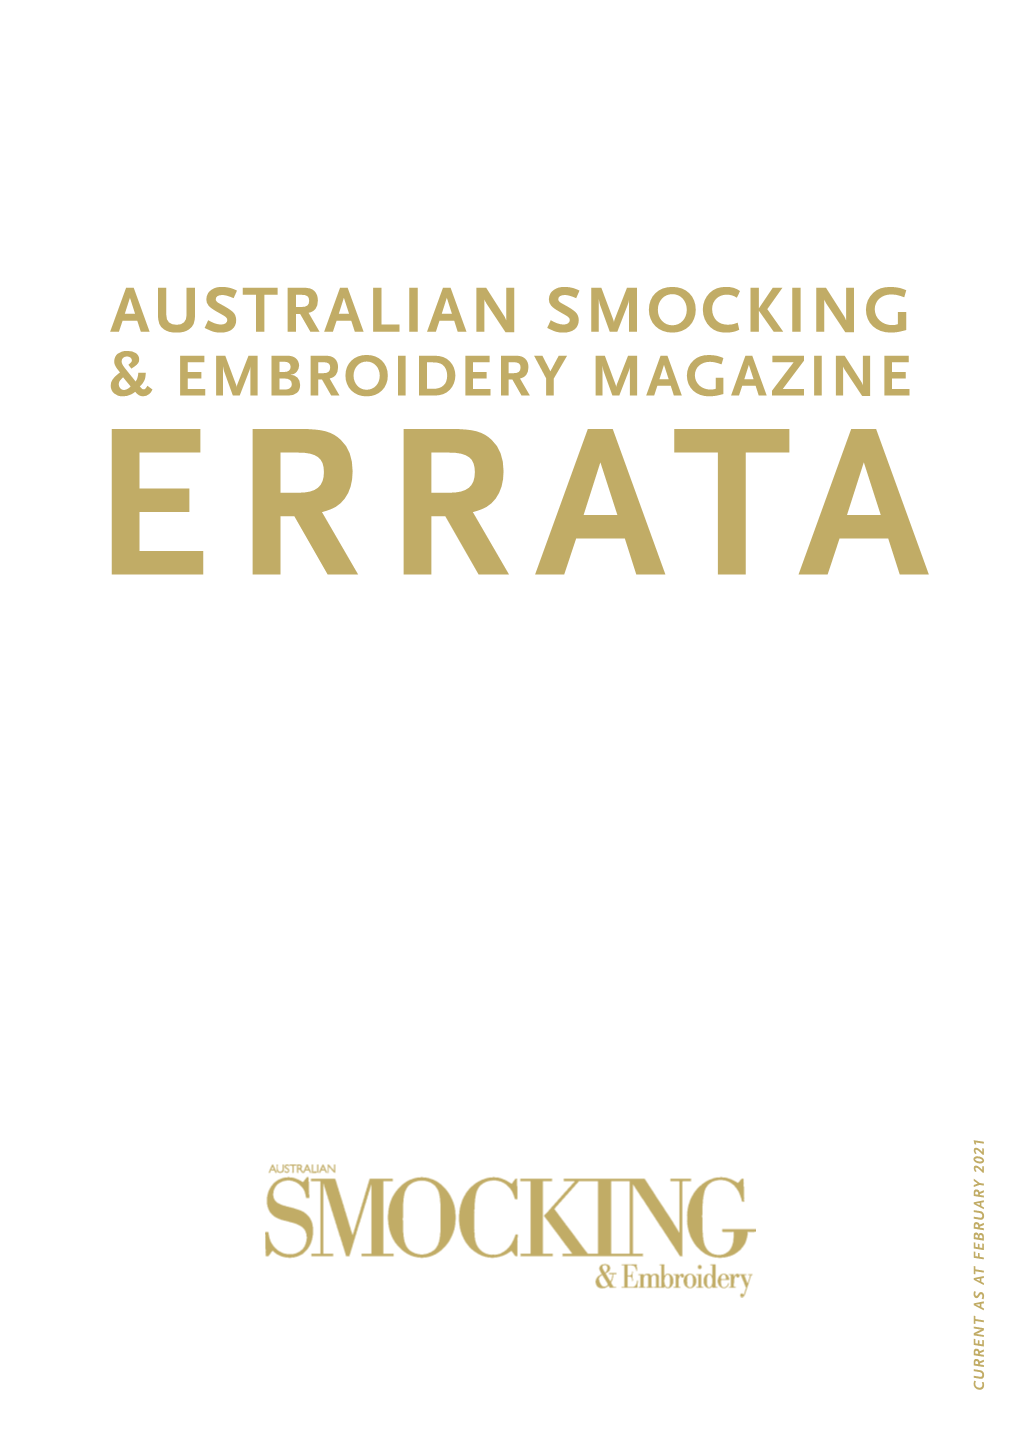 Australian Smocking & Embroidery Magazine Errata Current As at February 2021 Current As at Errata